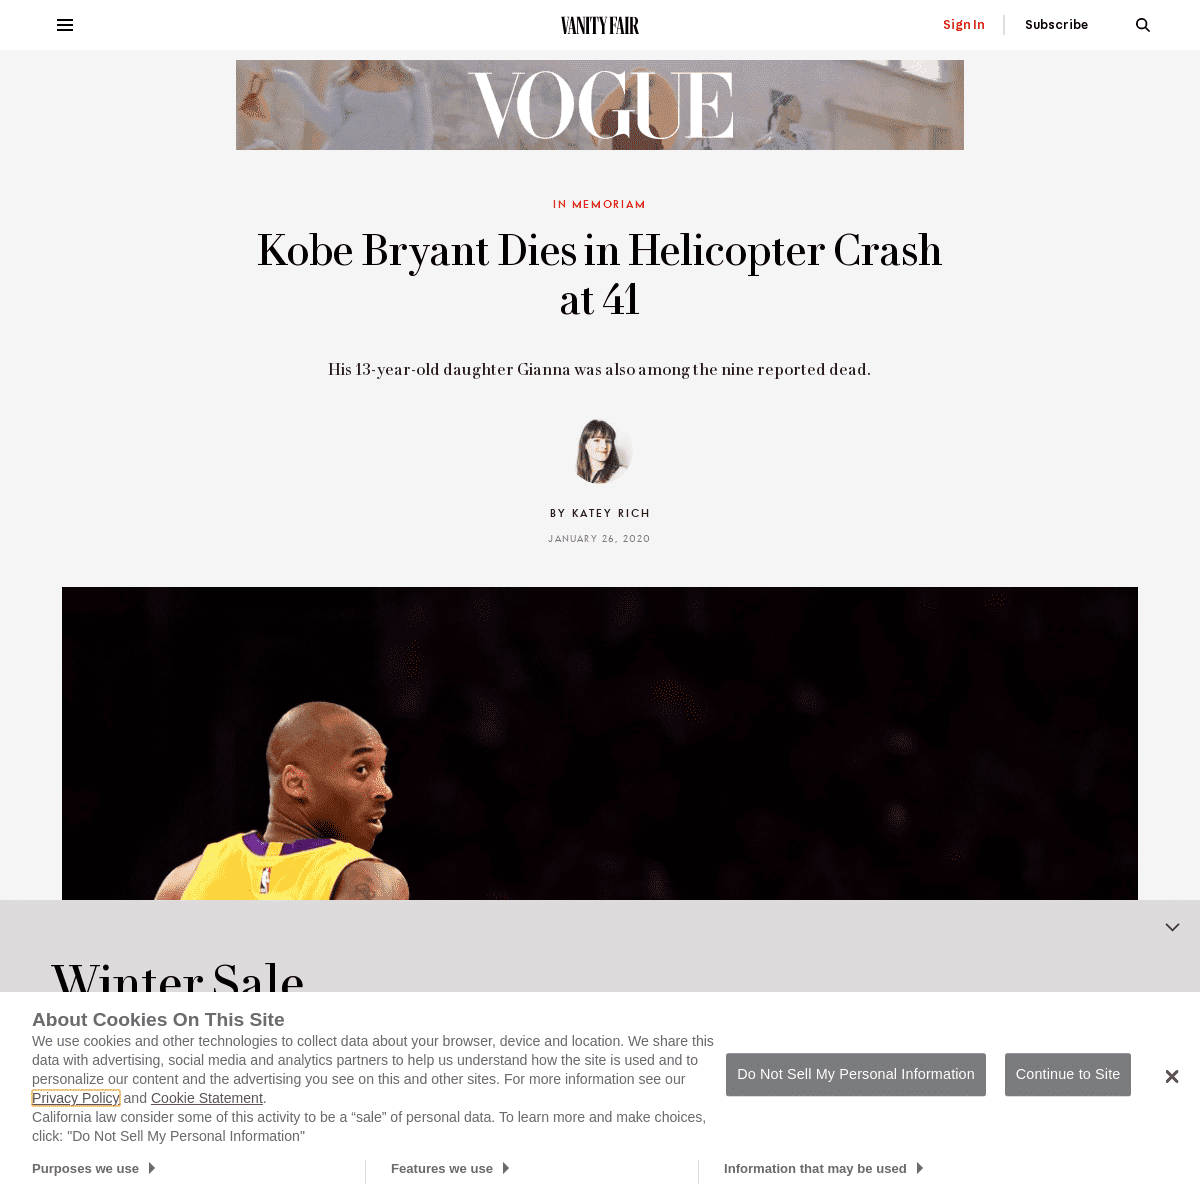 A complete backup of www.vanityfair.com/style/2020/01/kobe-bryant-dead-helicopter-crash